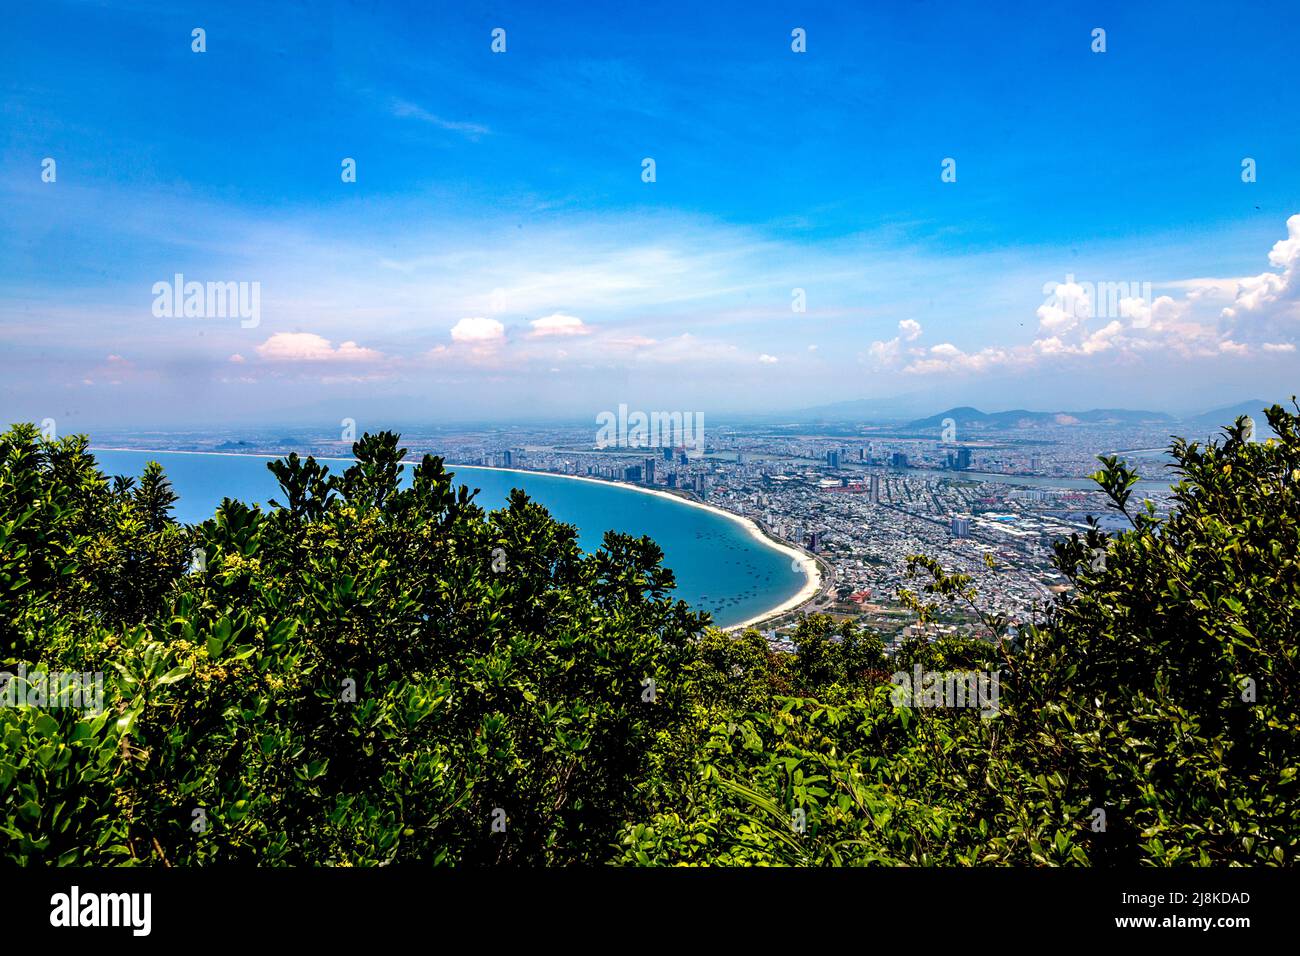 A view of Da Nang from high up on a mountain called Son Tra or Monkey Mountain. Stock Photo